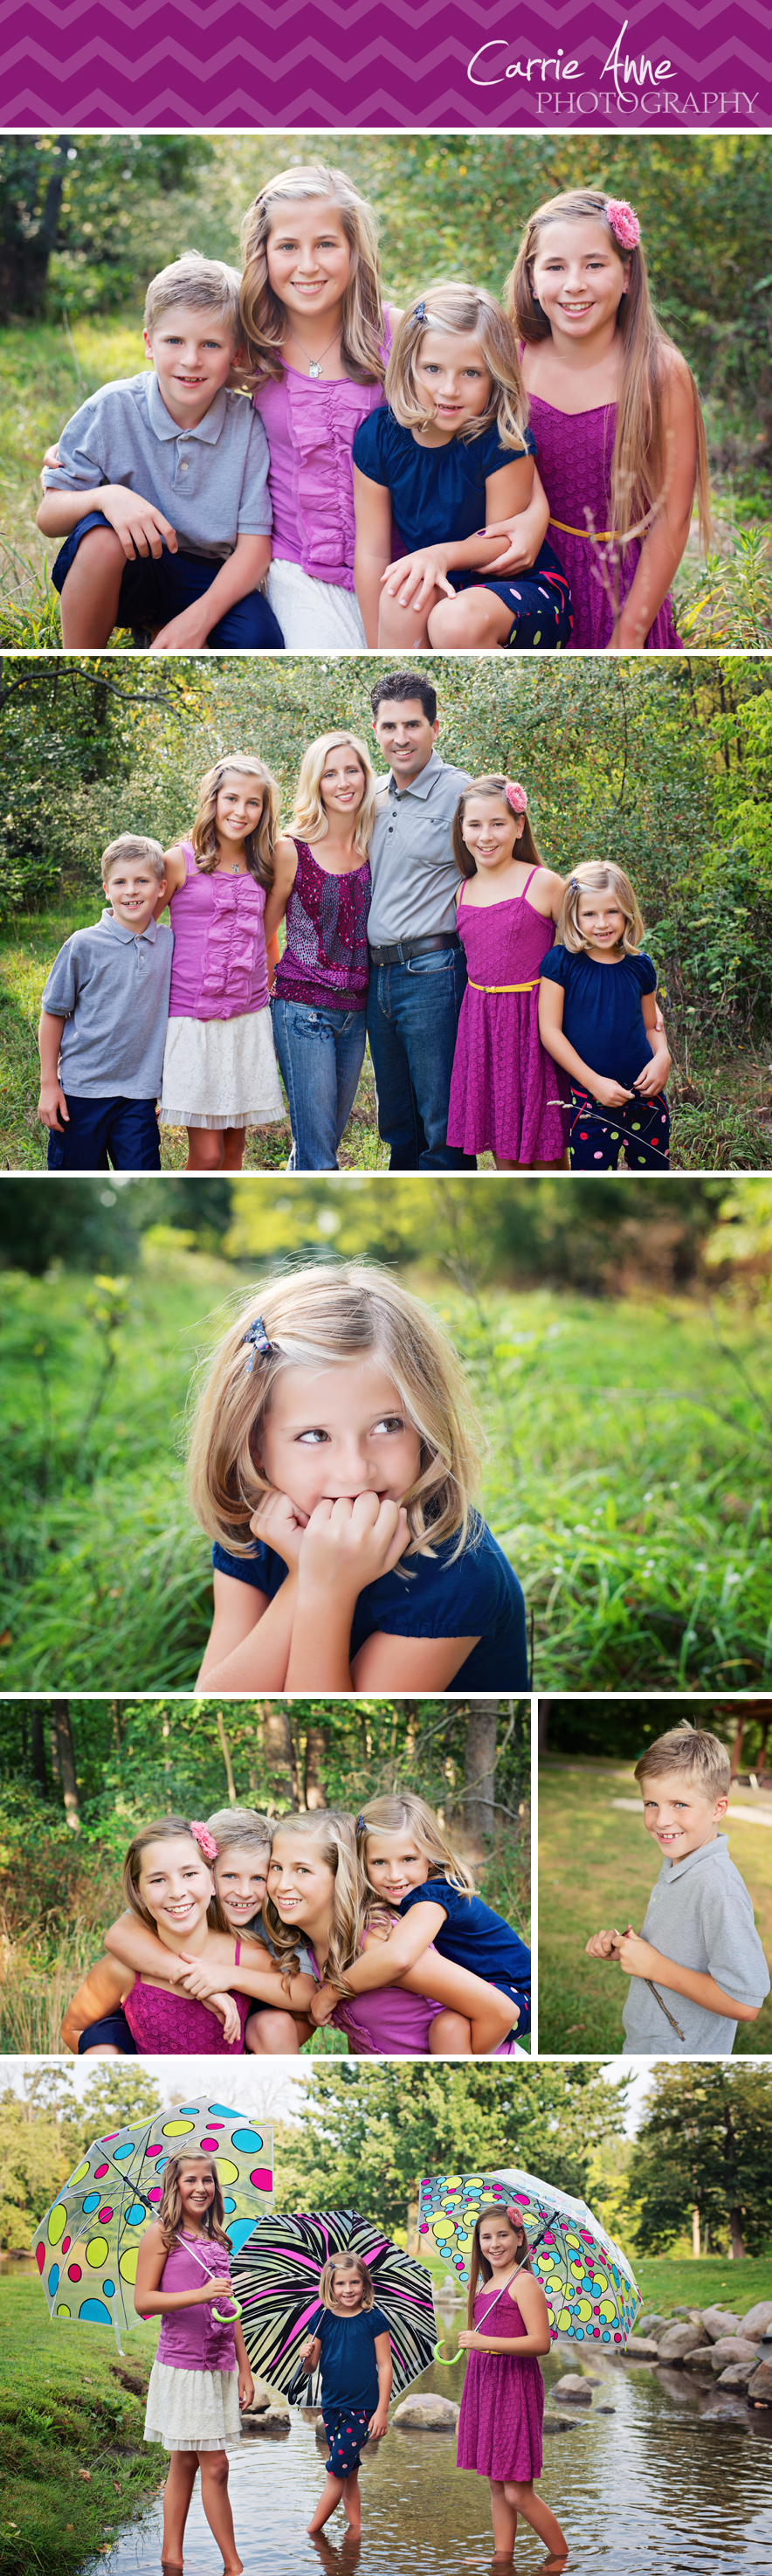 Colorful Family Photography at Fallasburg Park Grand Rapids Family and Child Photographer Carrie Anne Photography